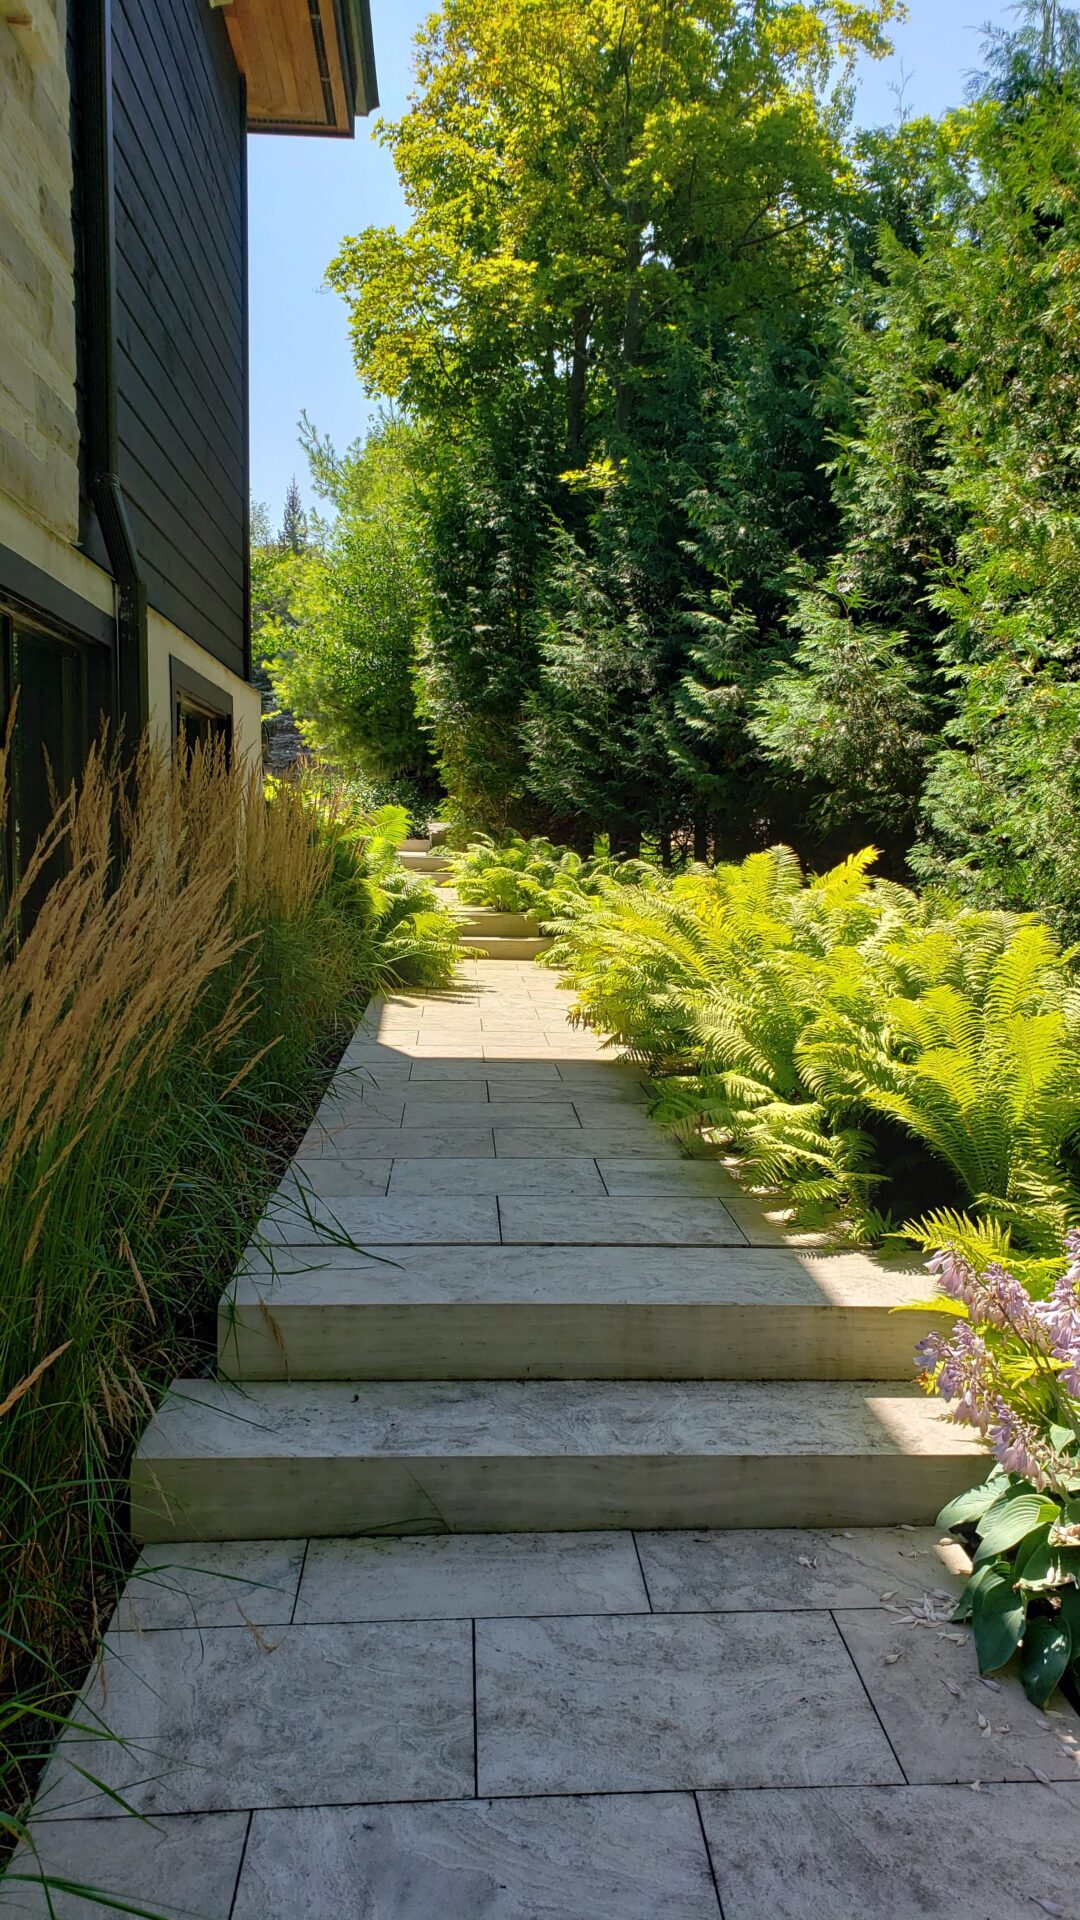 A serene garden pathway flanked by lush green ferns and ornamental grasses, leading past a modern structure under a clear blue sky.